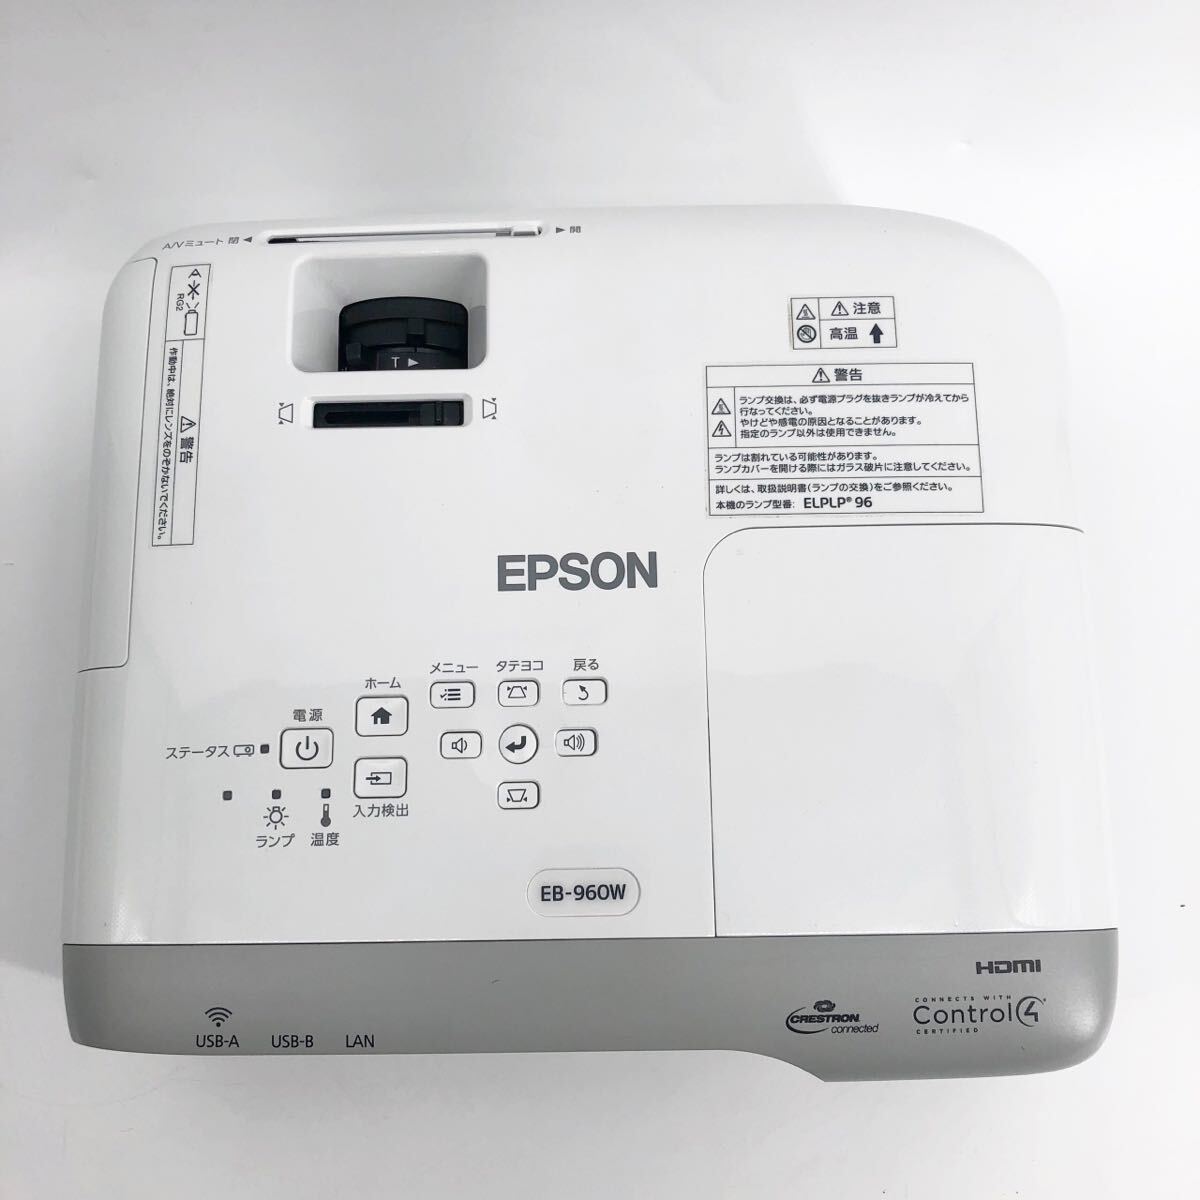  lamp period of use 87 hour Epson EB-960W projector 